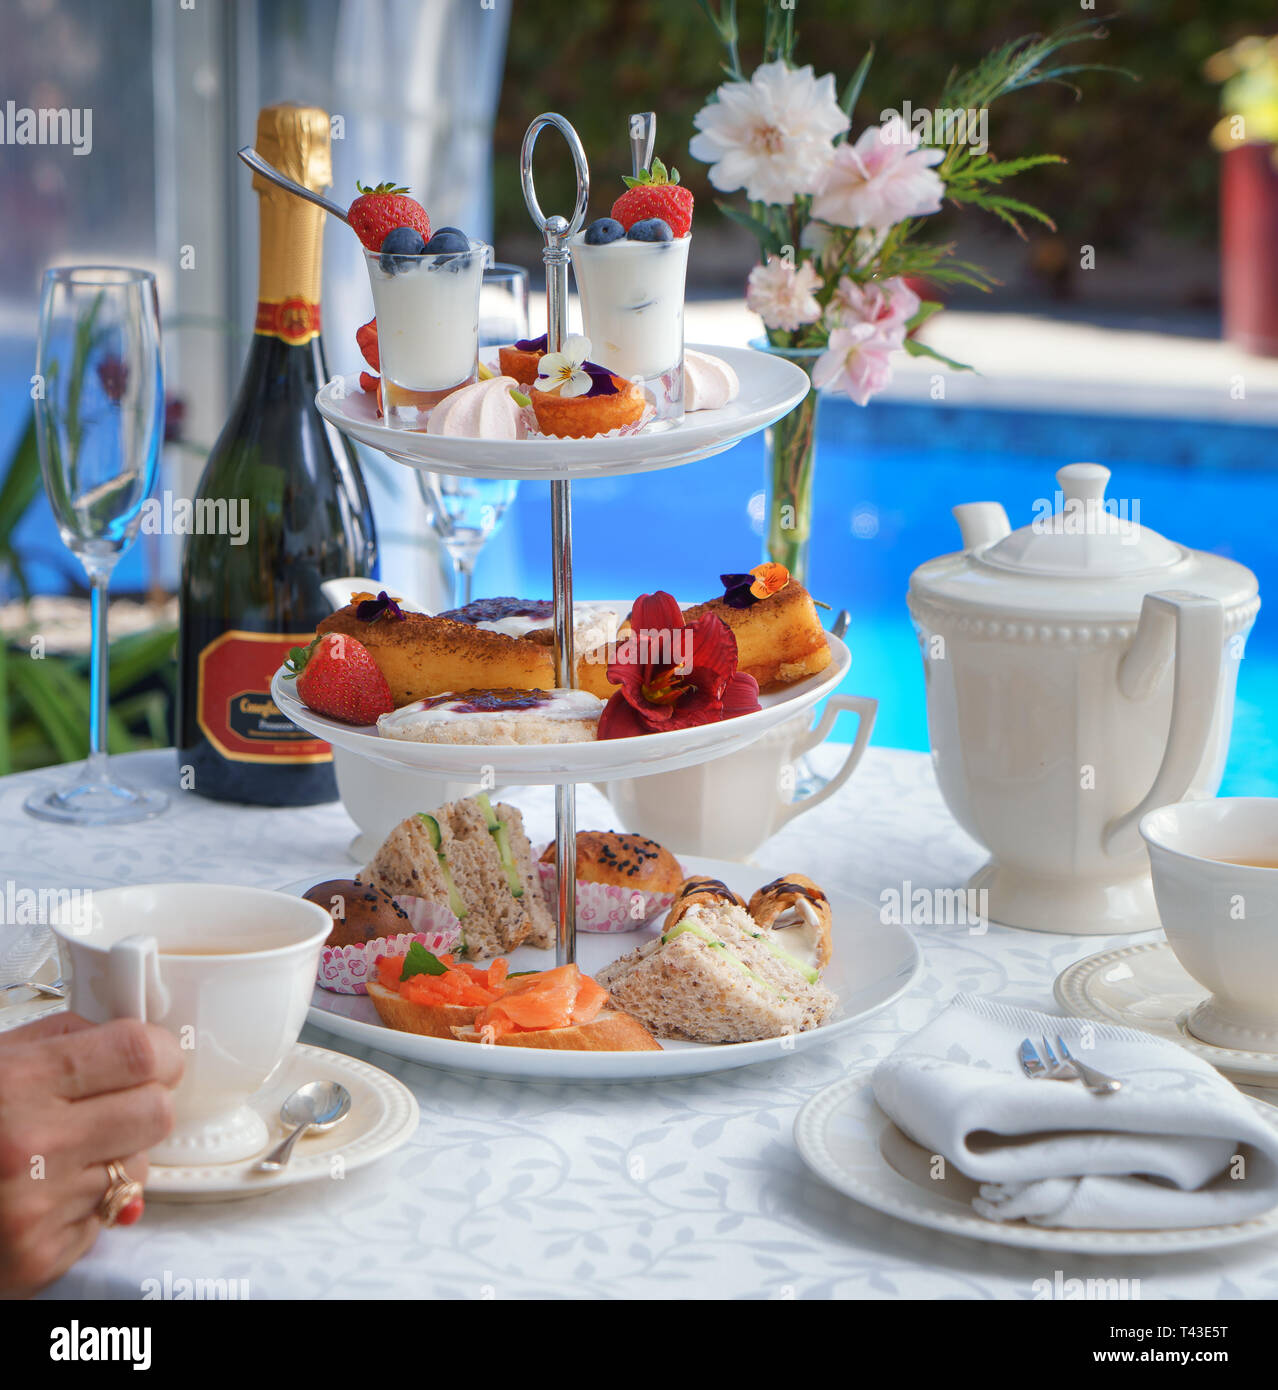 A close up of a high tea on a cake stand served with a bottle of fizz by the pool Stock Photo